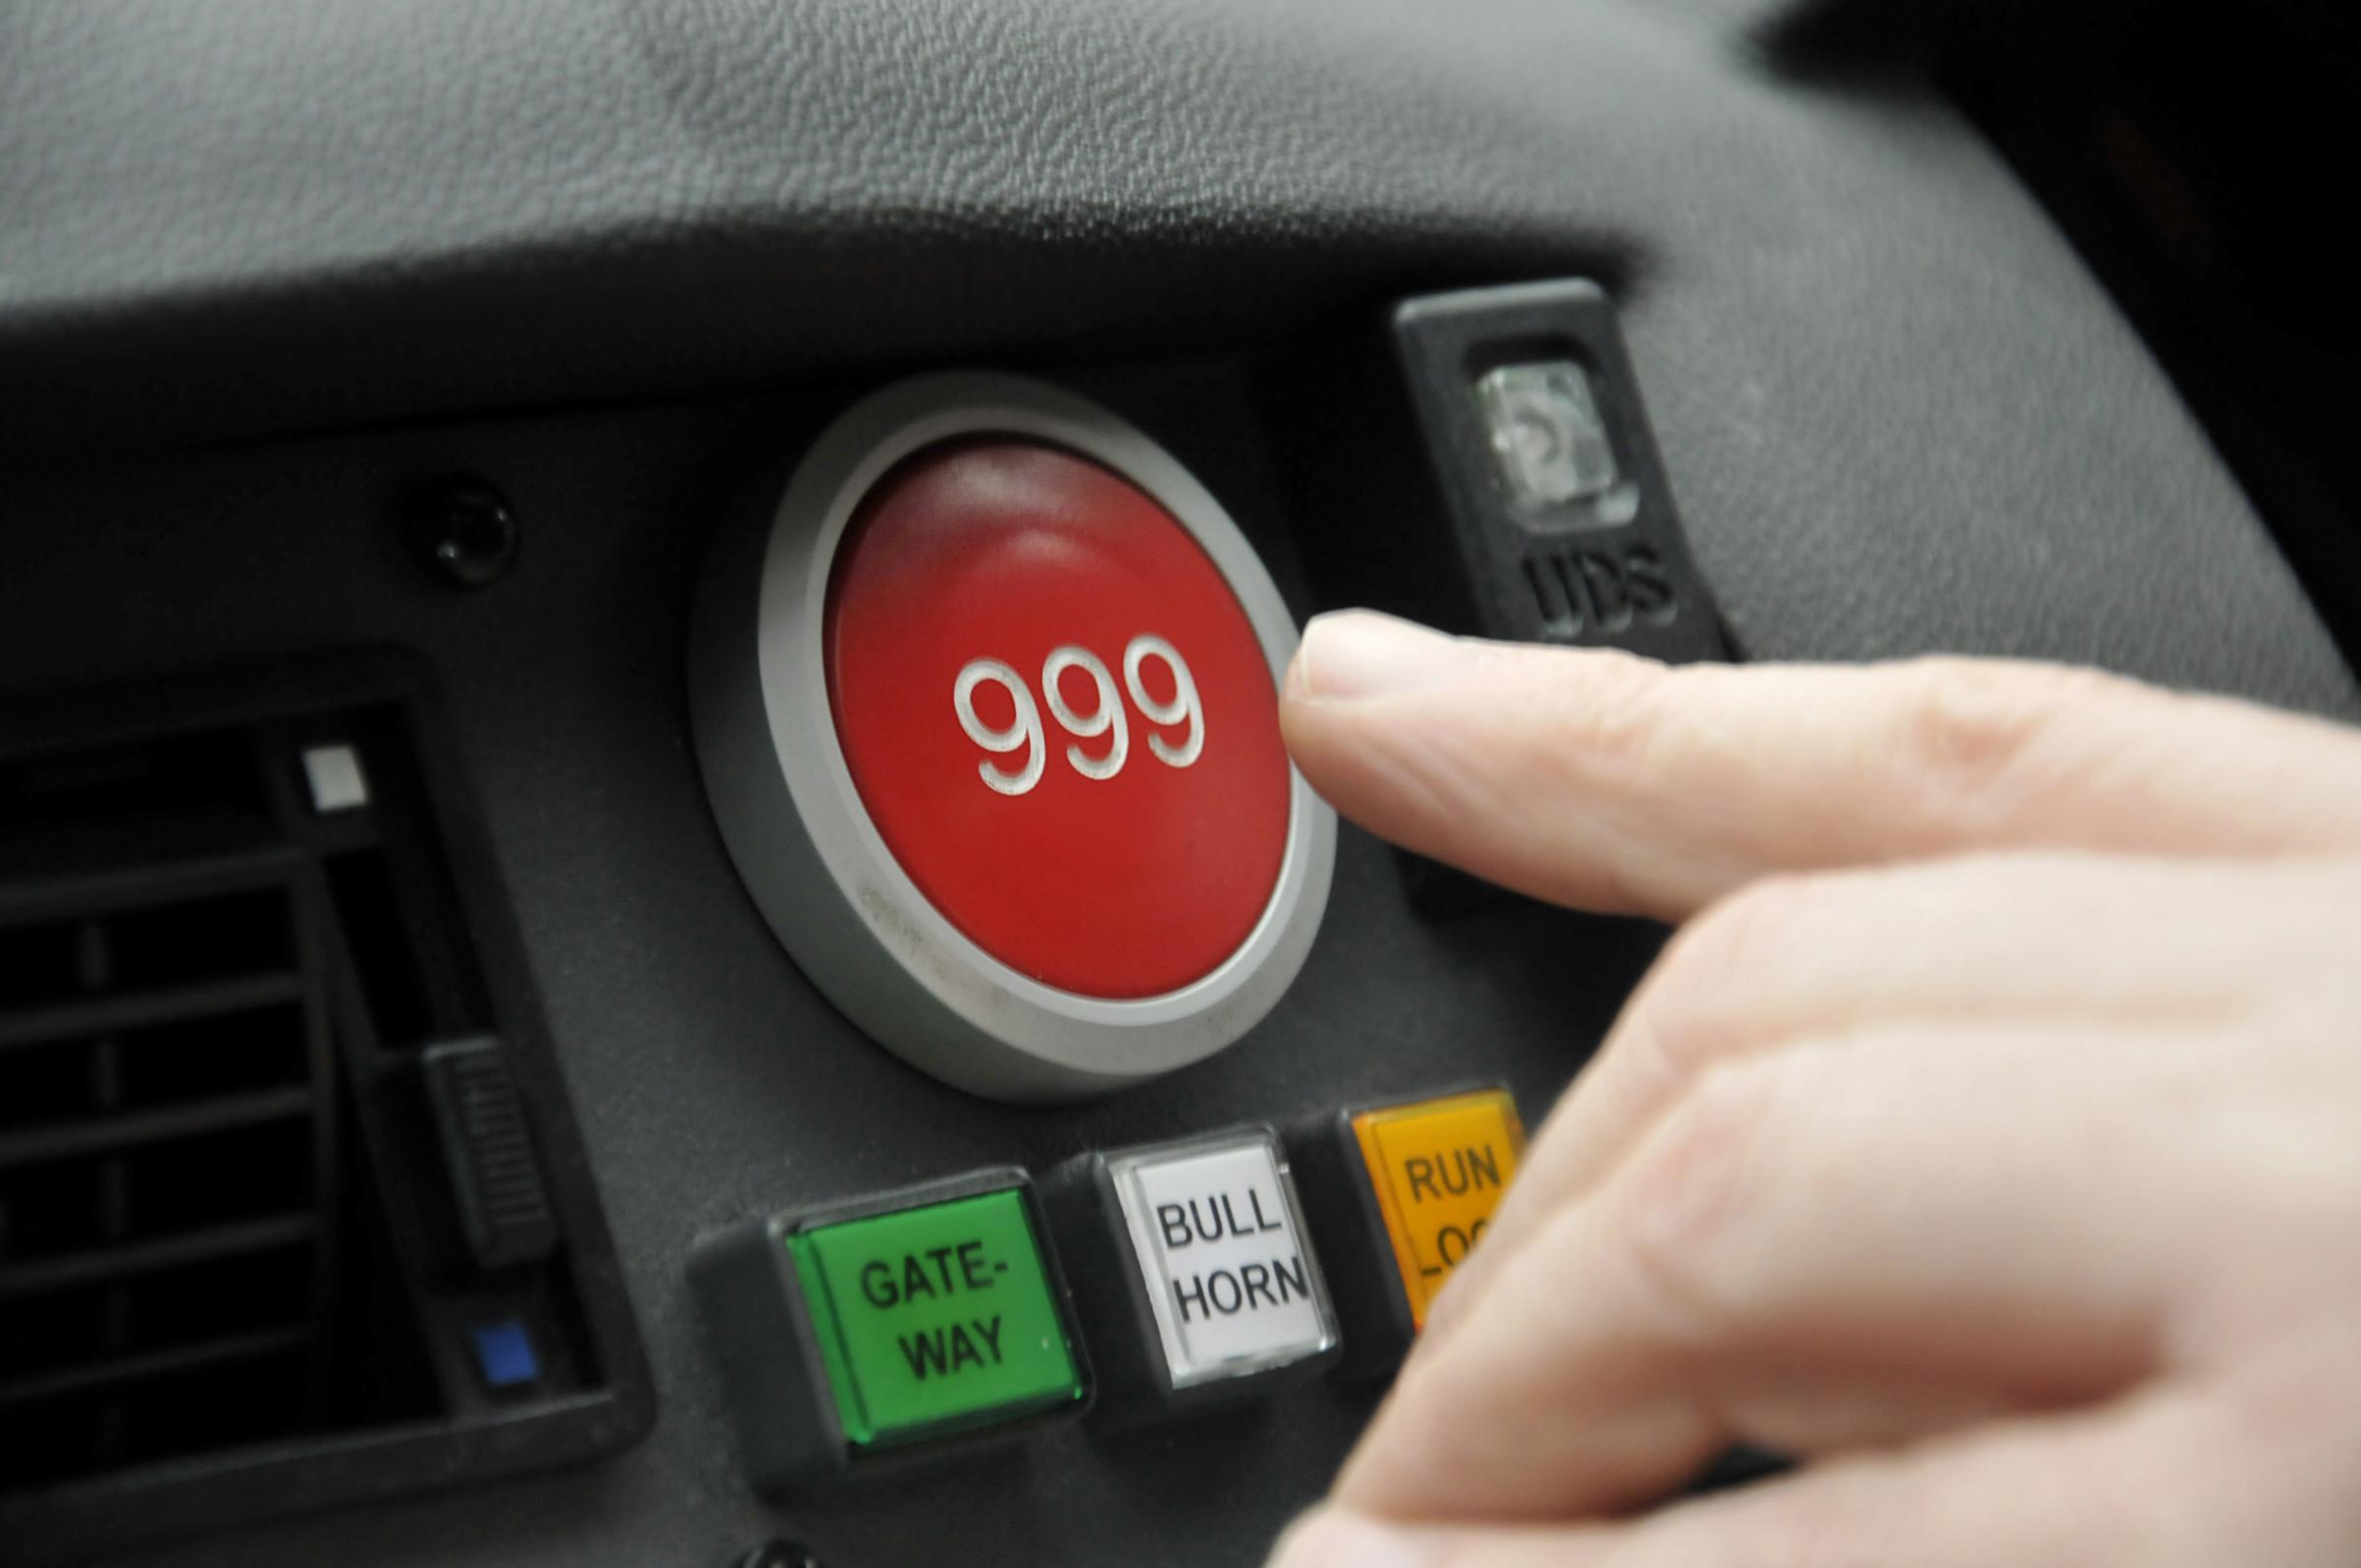 Need to ring 999, but it's not safe to talk? Here's what to do ...